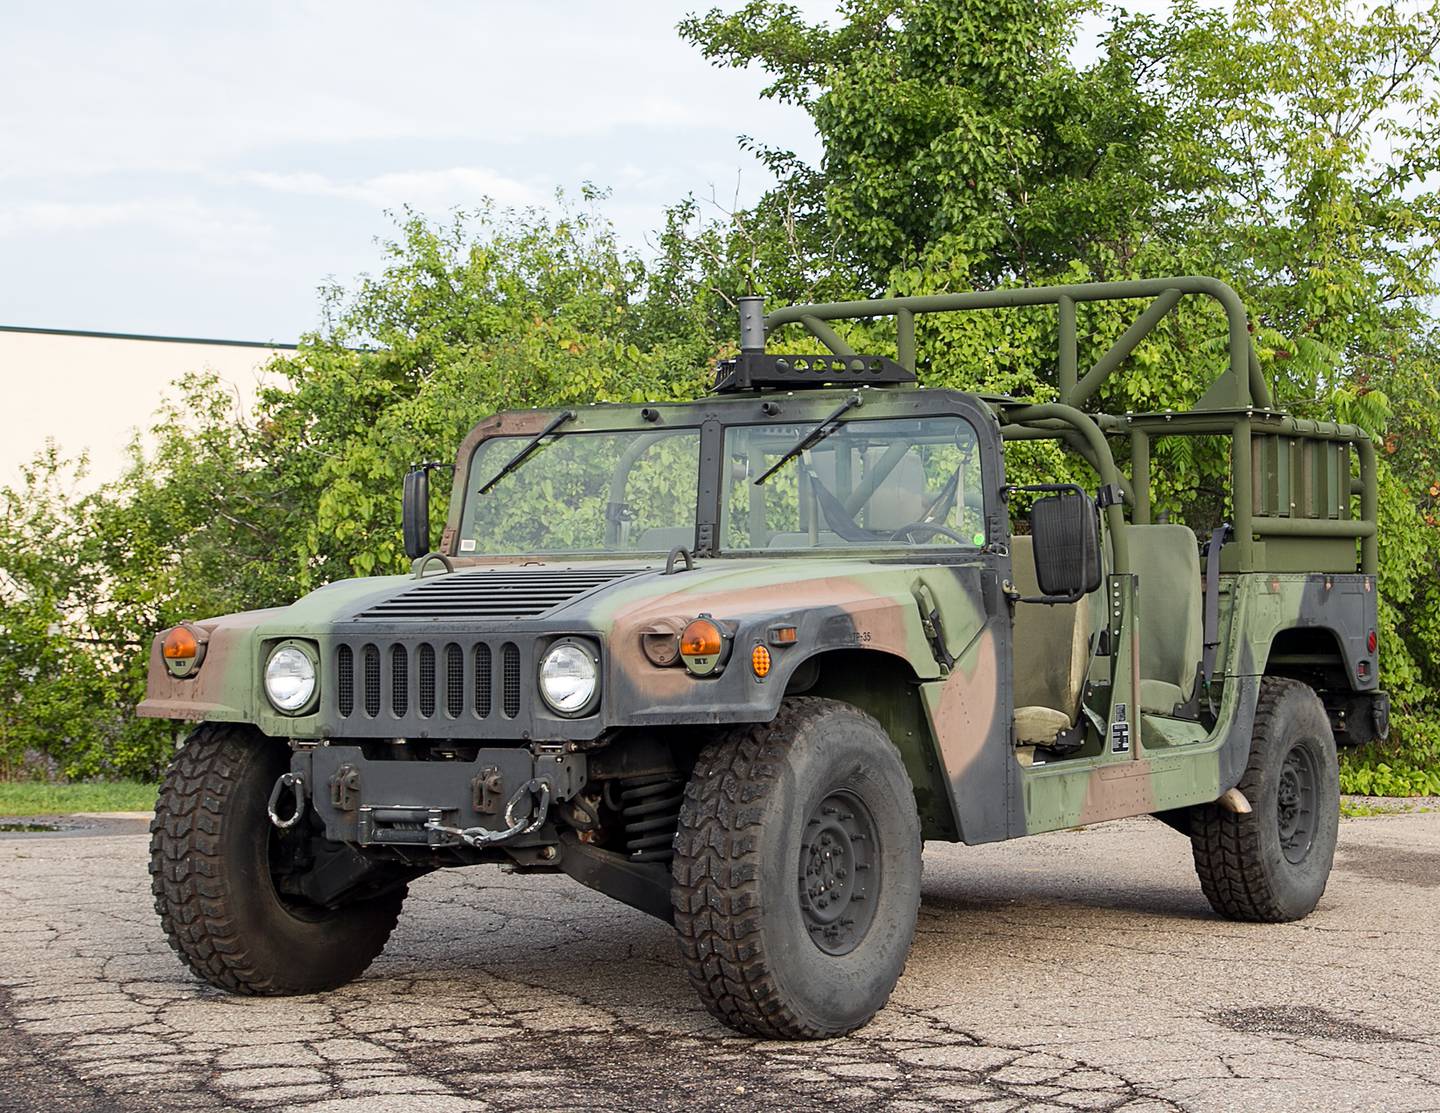 7 ways to enhance the US military’s Humvee fleet [Commentary]